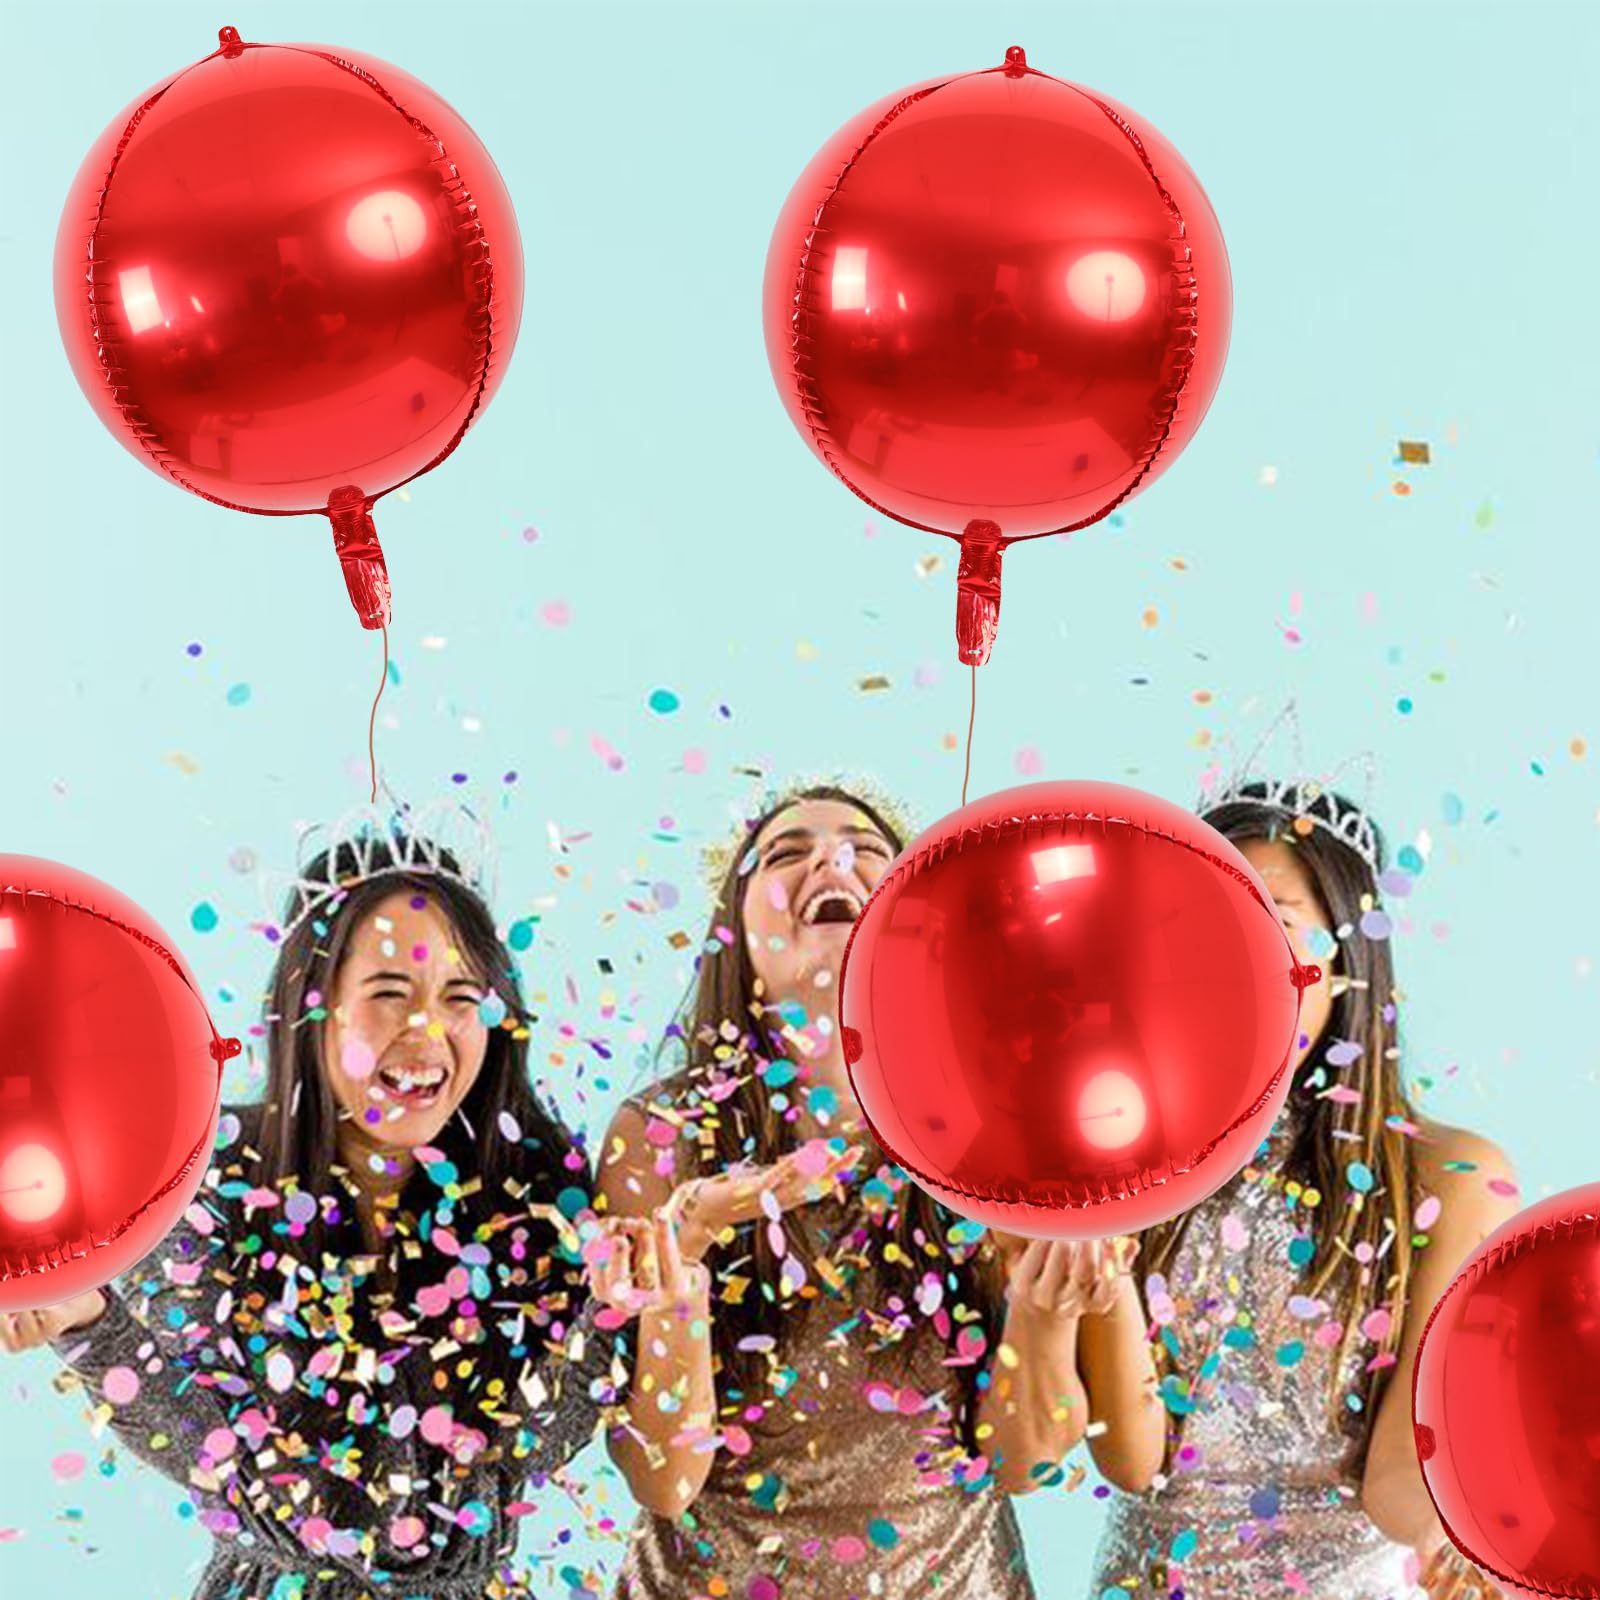 RUBFAC Red Metallic Balloons 22 Inch, 6pcs 4D Round 360 Red Chrome Balloon for Bachelorette Party Decorations, Red Metallic Balloons for Baby Shower, Birthday and More